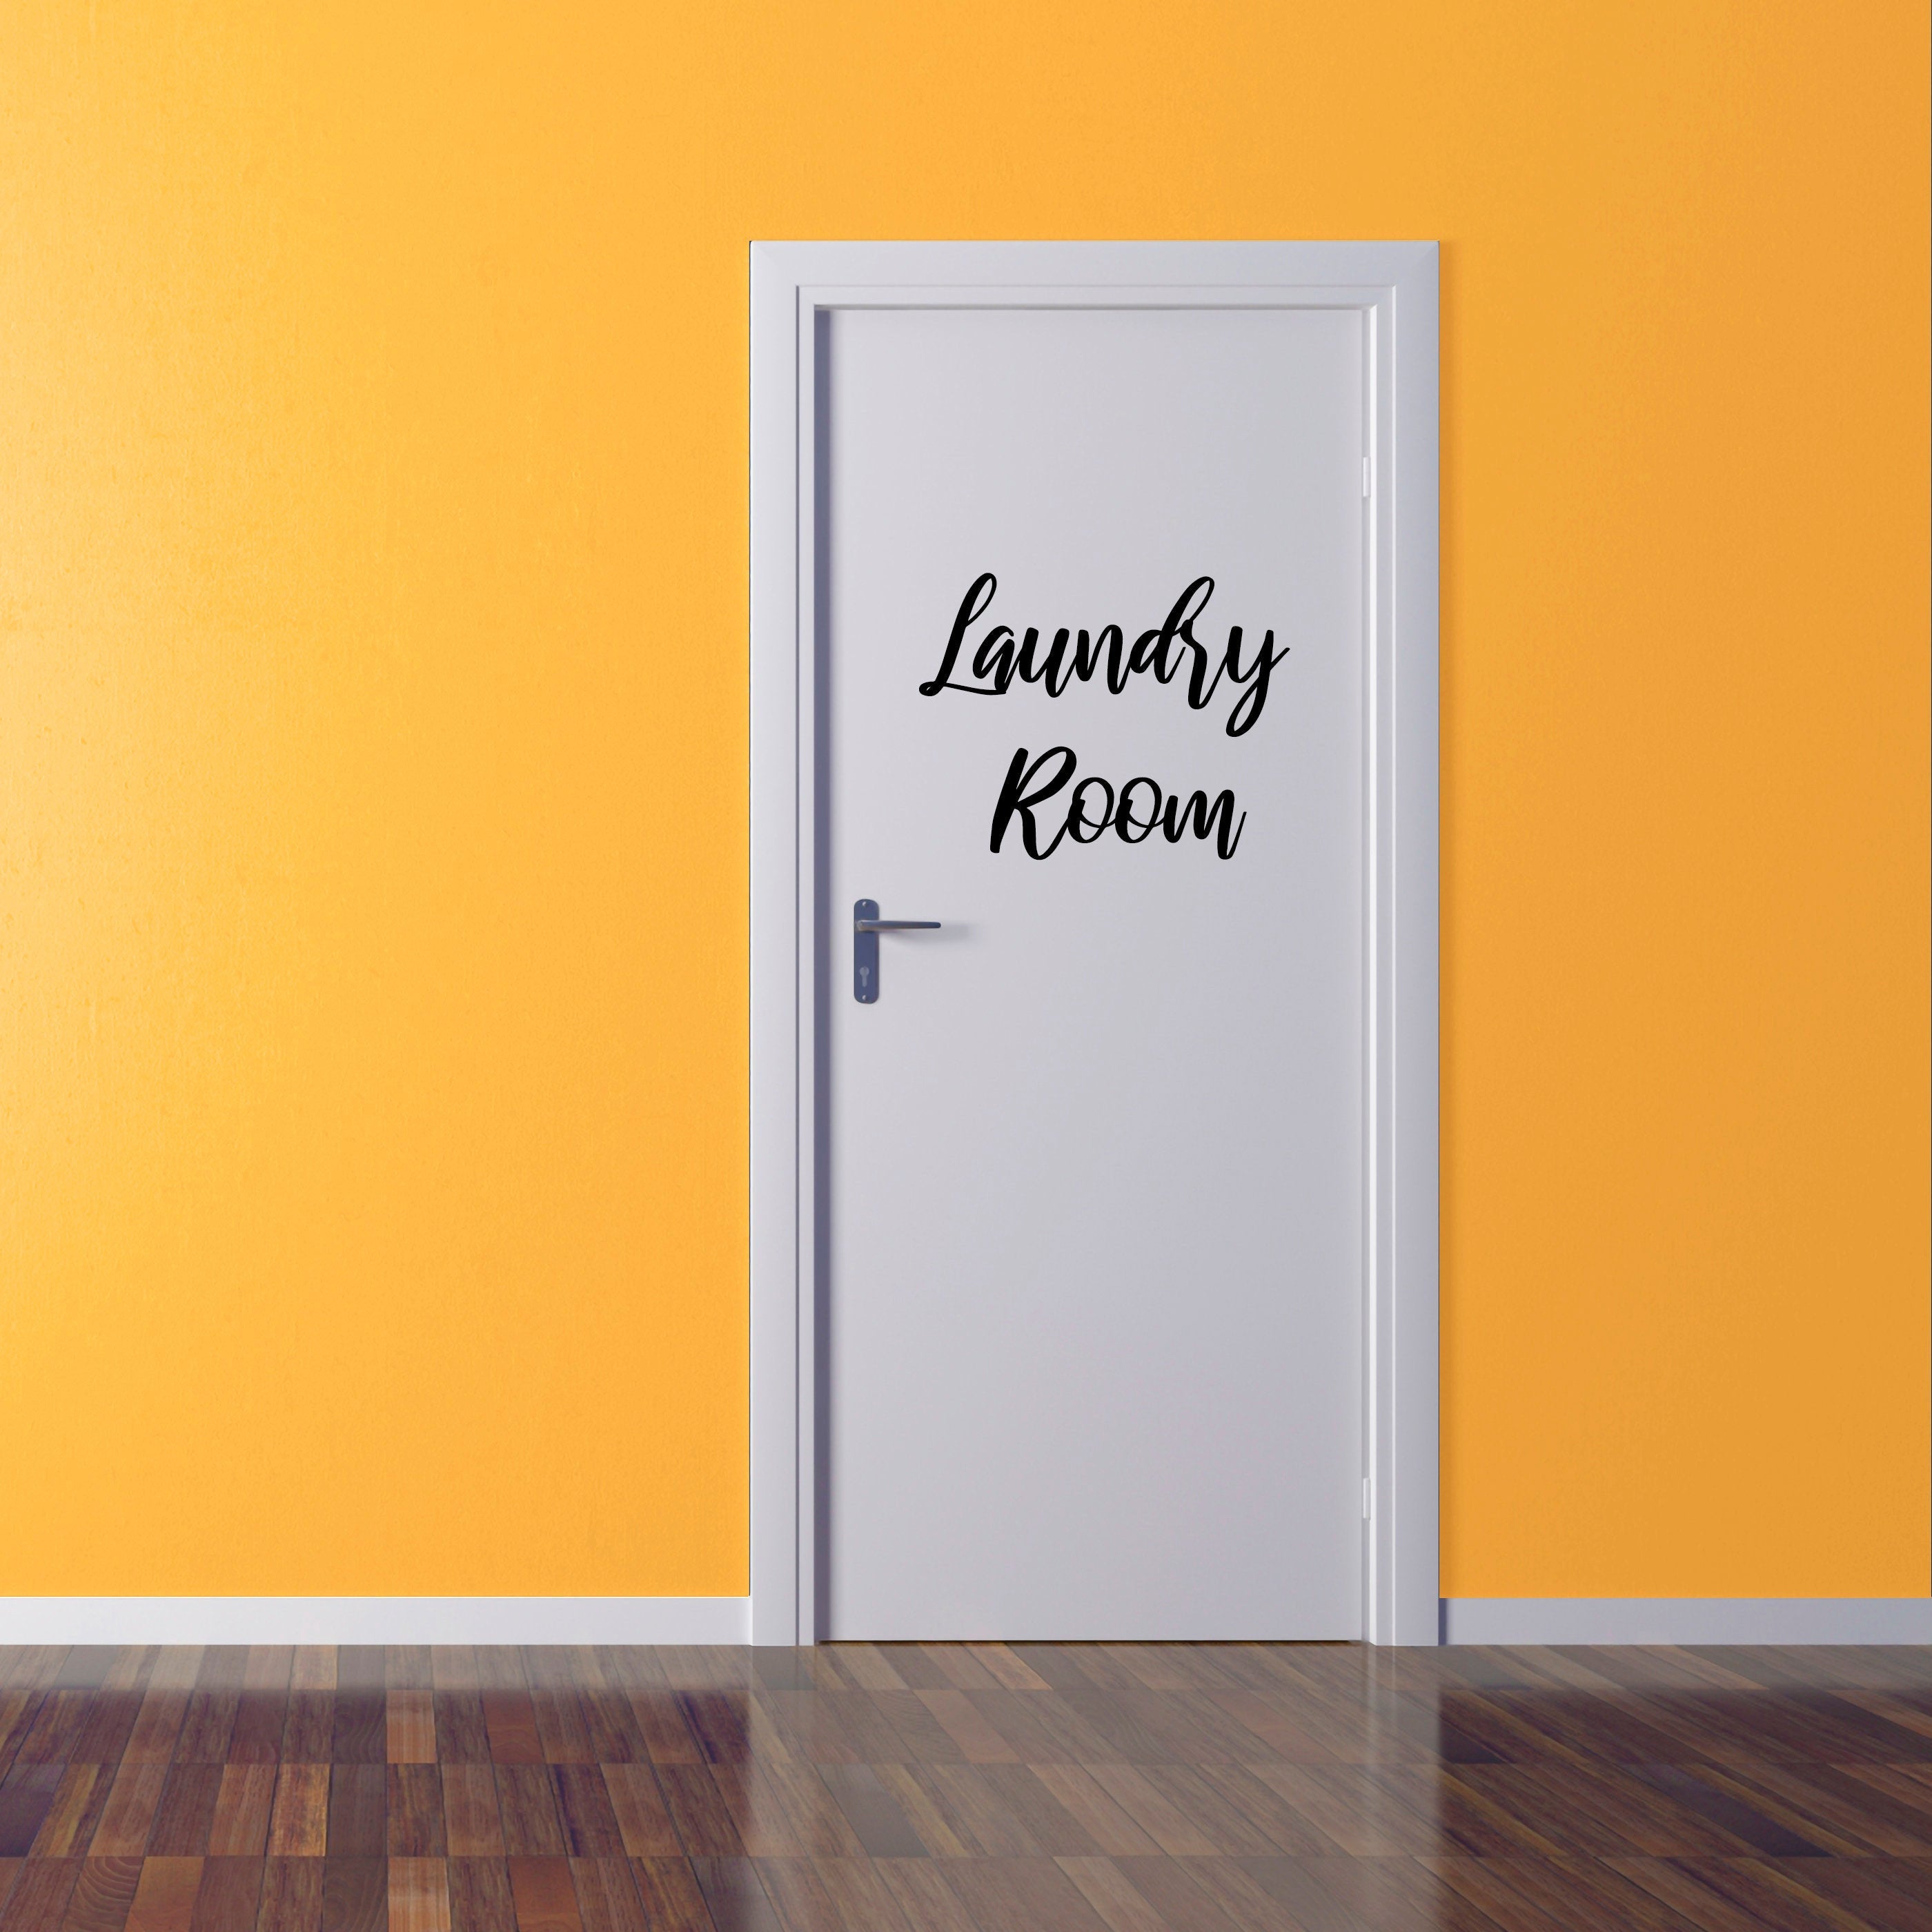 Laundry Room - Vinyl Decal for Laundry Room, Kitchen, Doors, Walls, Homes and More!